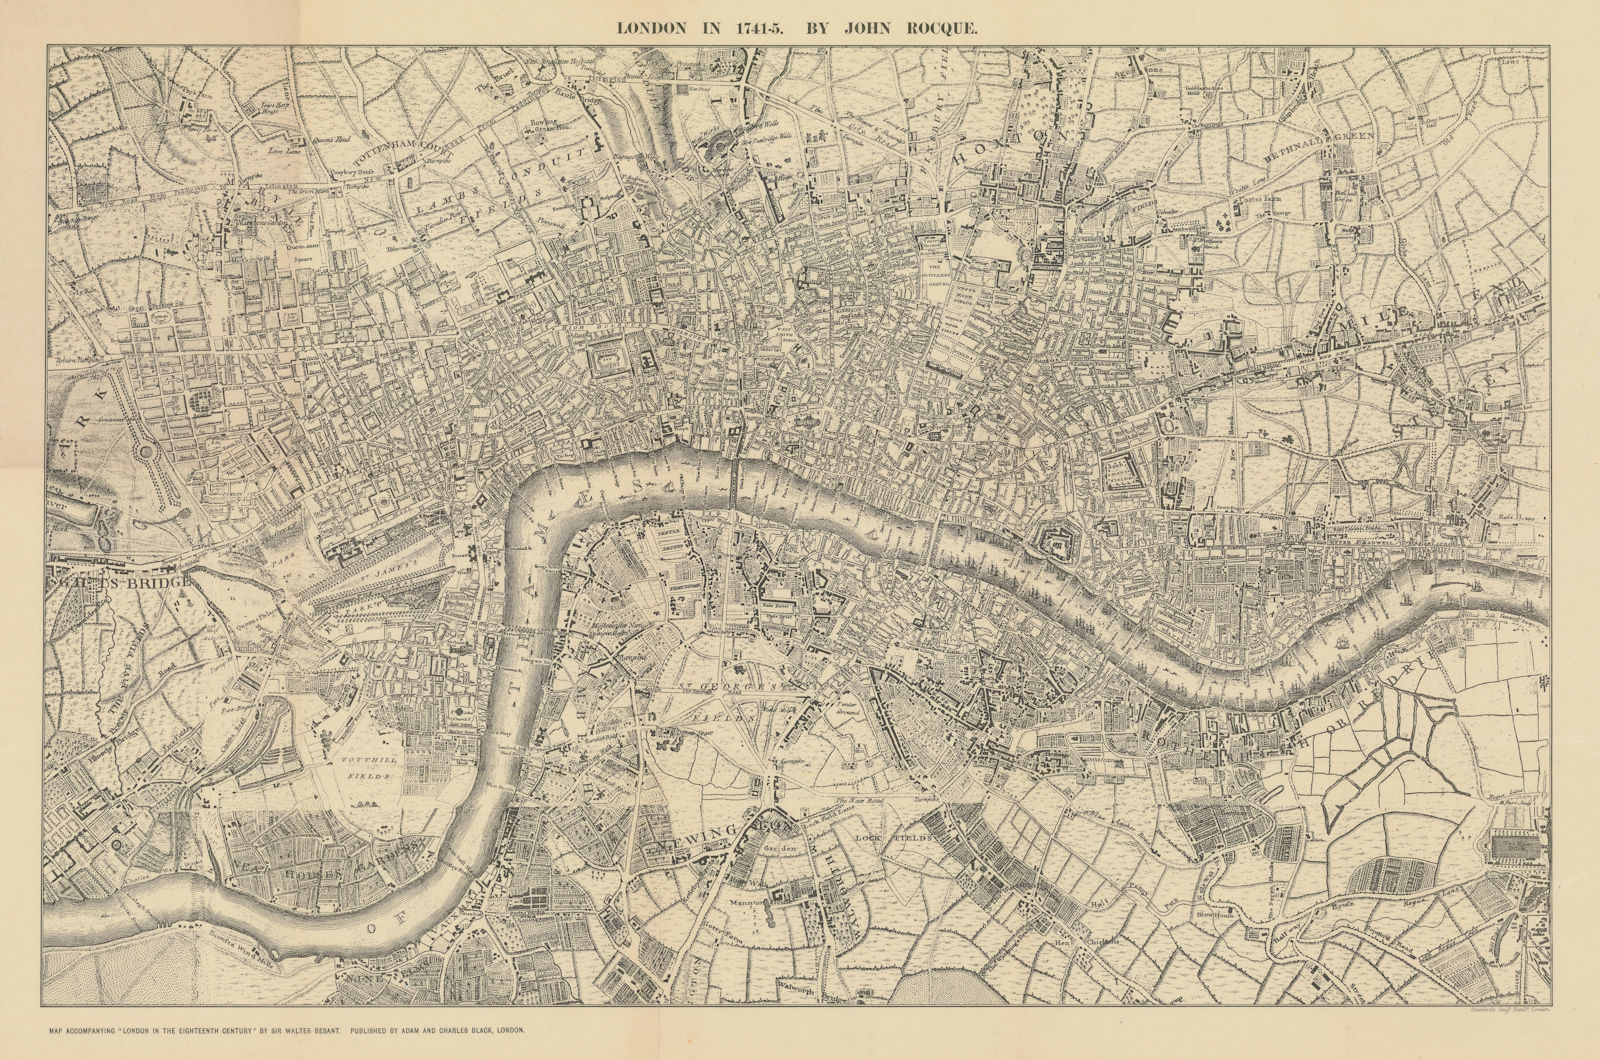 London in 1741-5 after John Rocque. Southwark Westminster. 52x79cm 1908 map